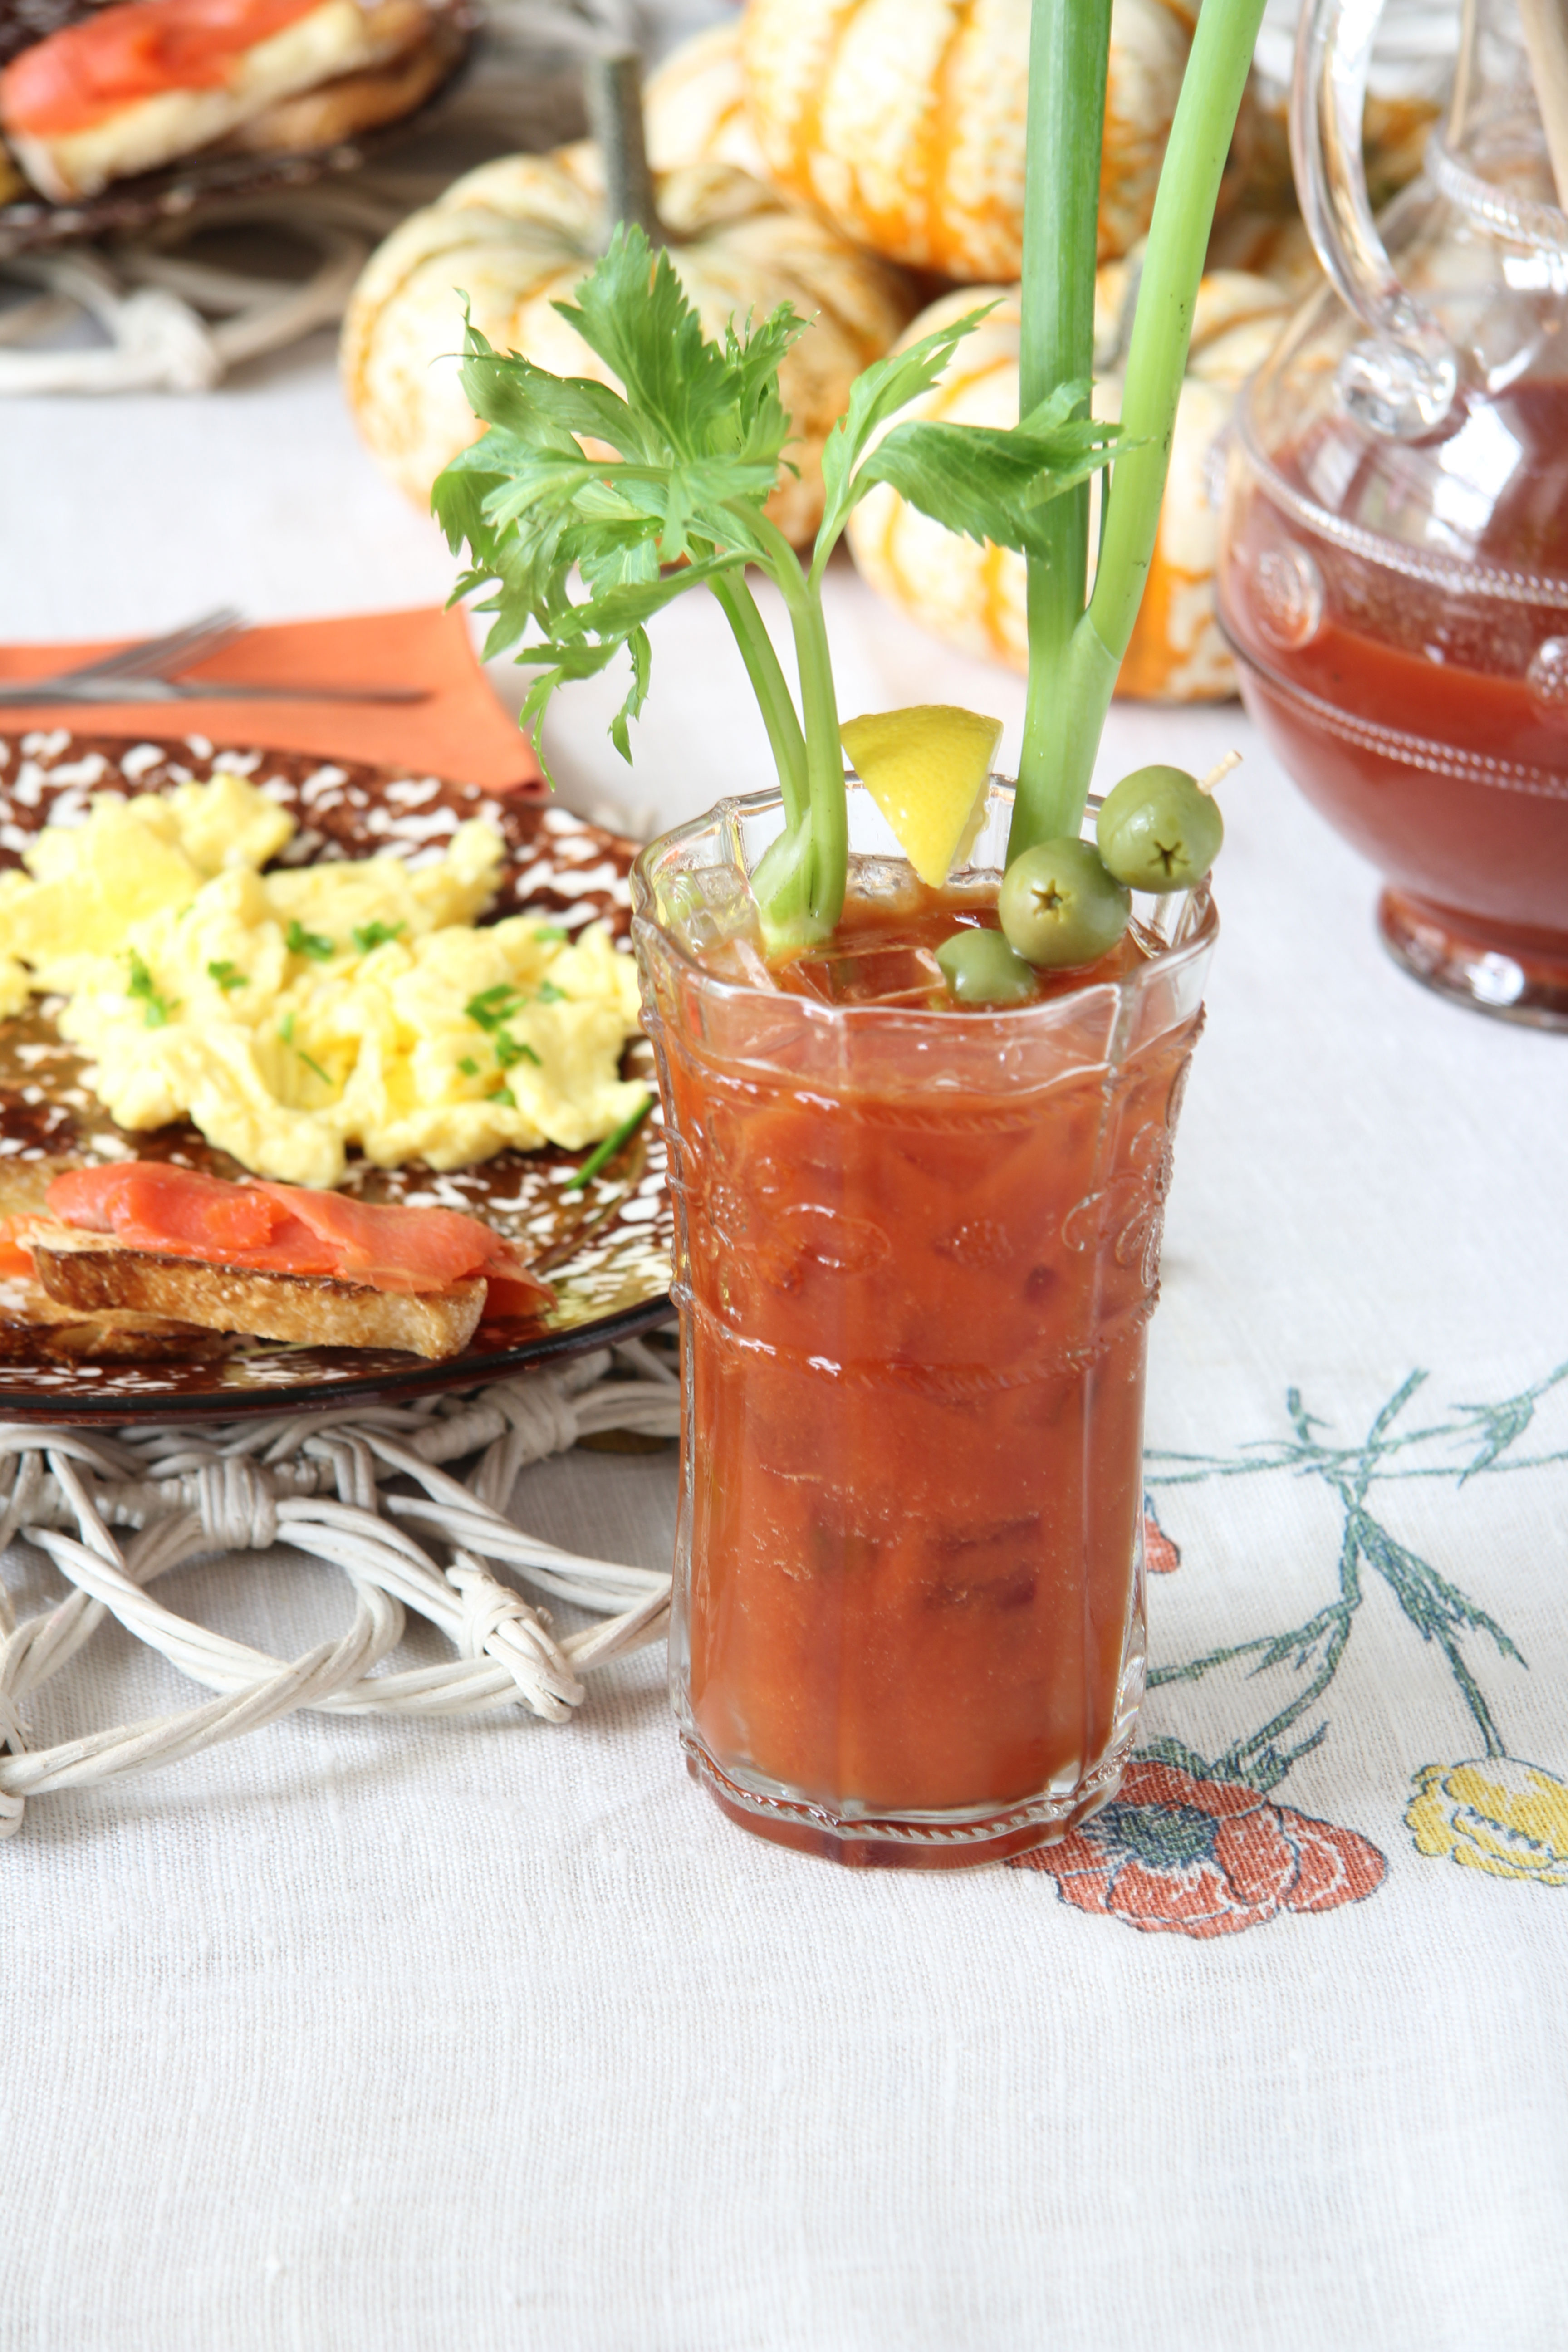 Nothing says Weekend Brunch better than a round of fresh Bloody Mary's with a garnish of celery, olives and lemon. 